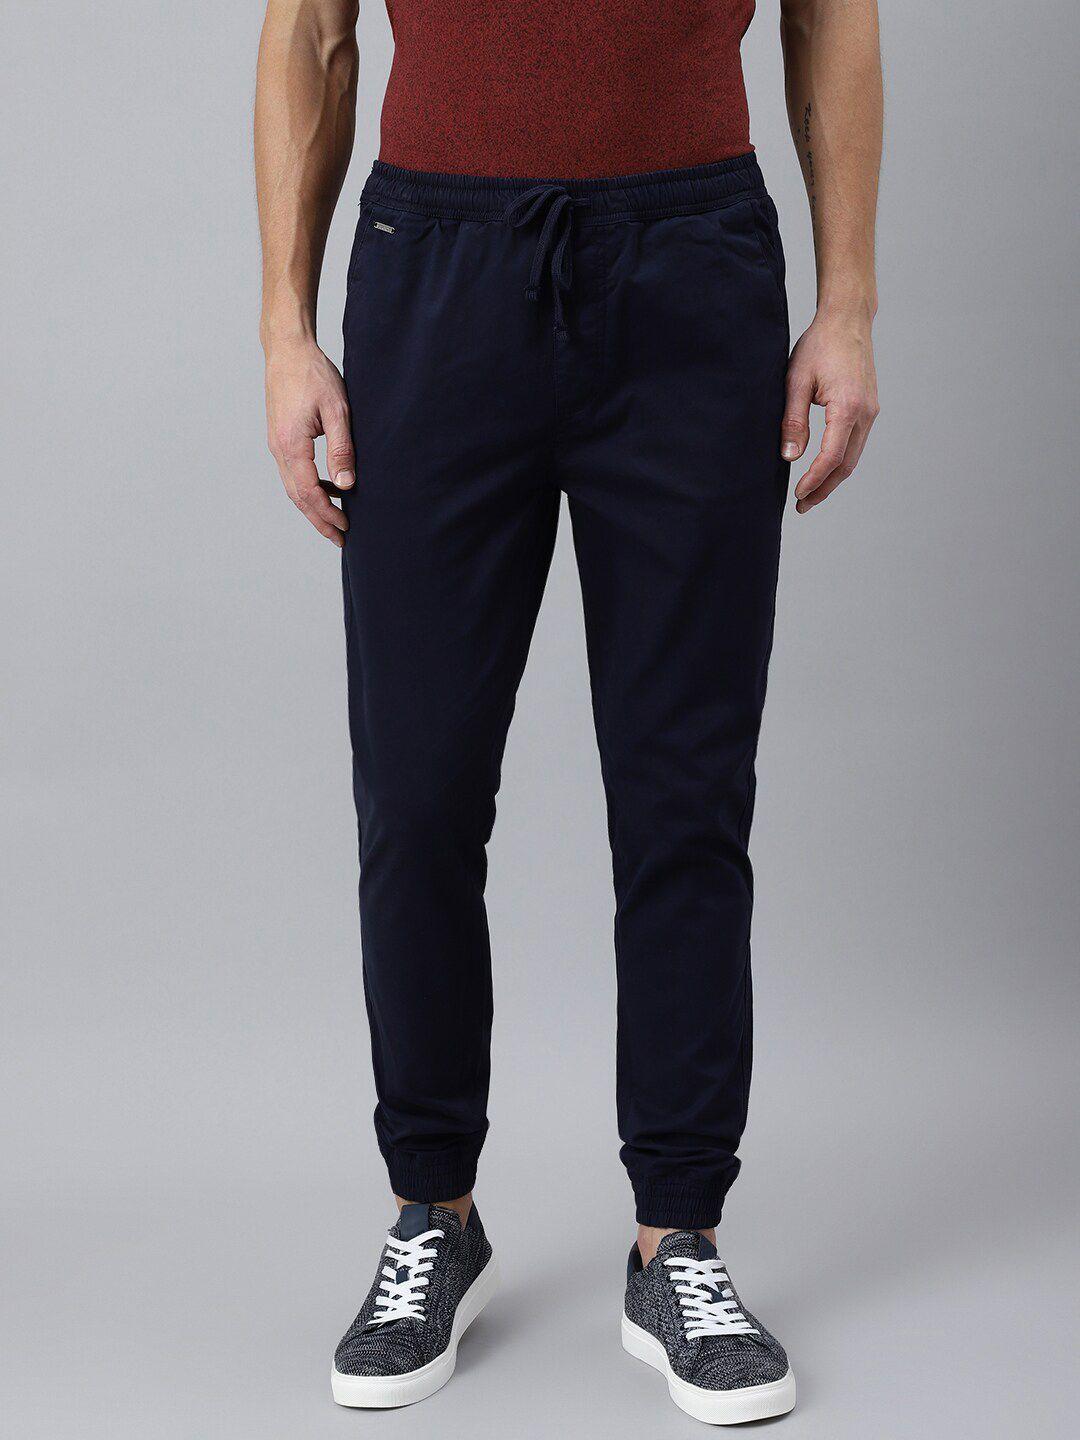 woodland men navy blue chinos trousers